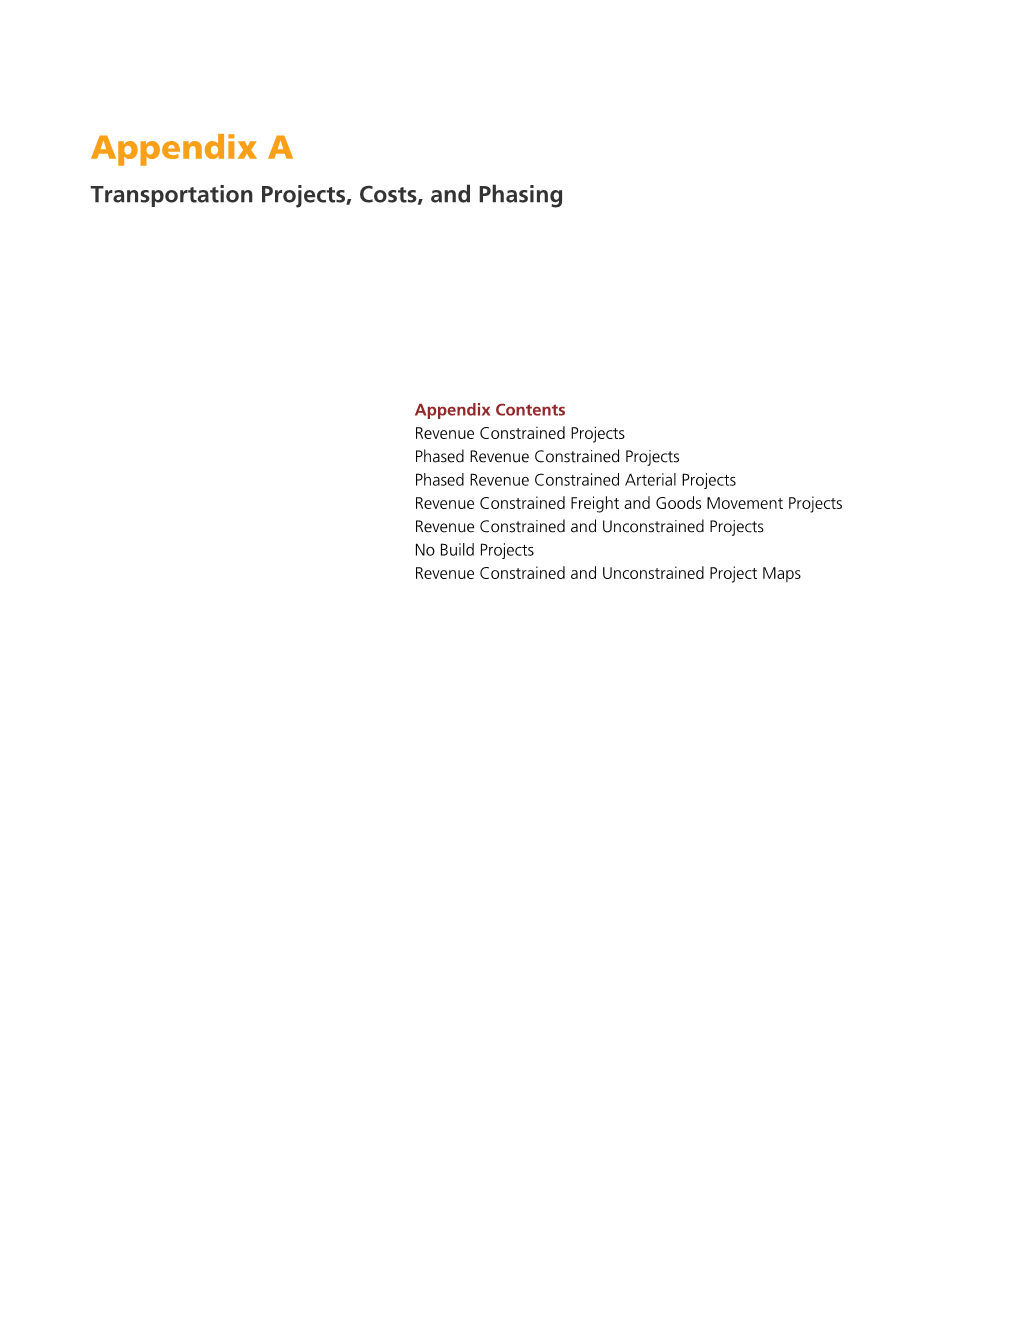 Transportation Projects, Costs, and Phasing